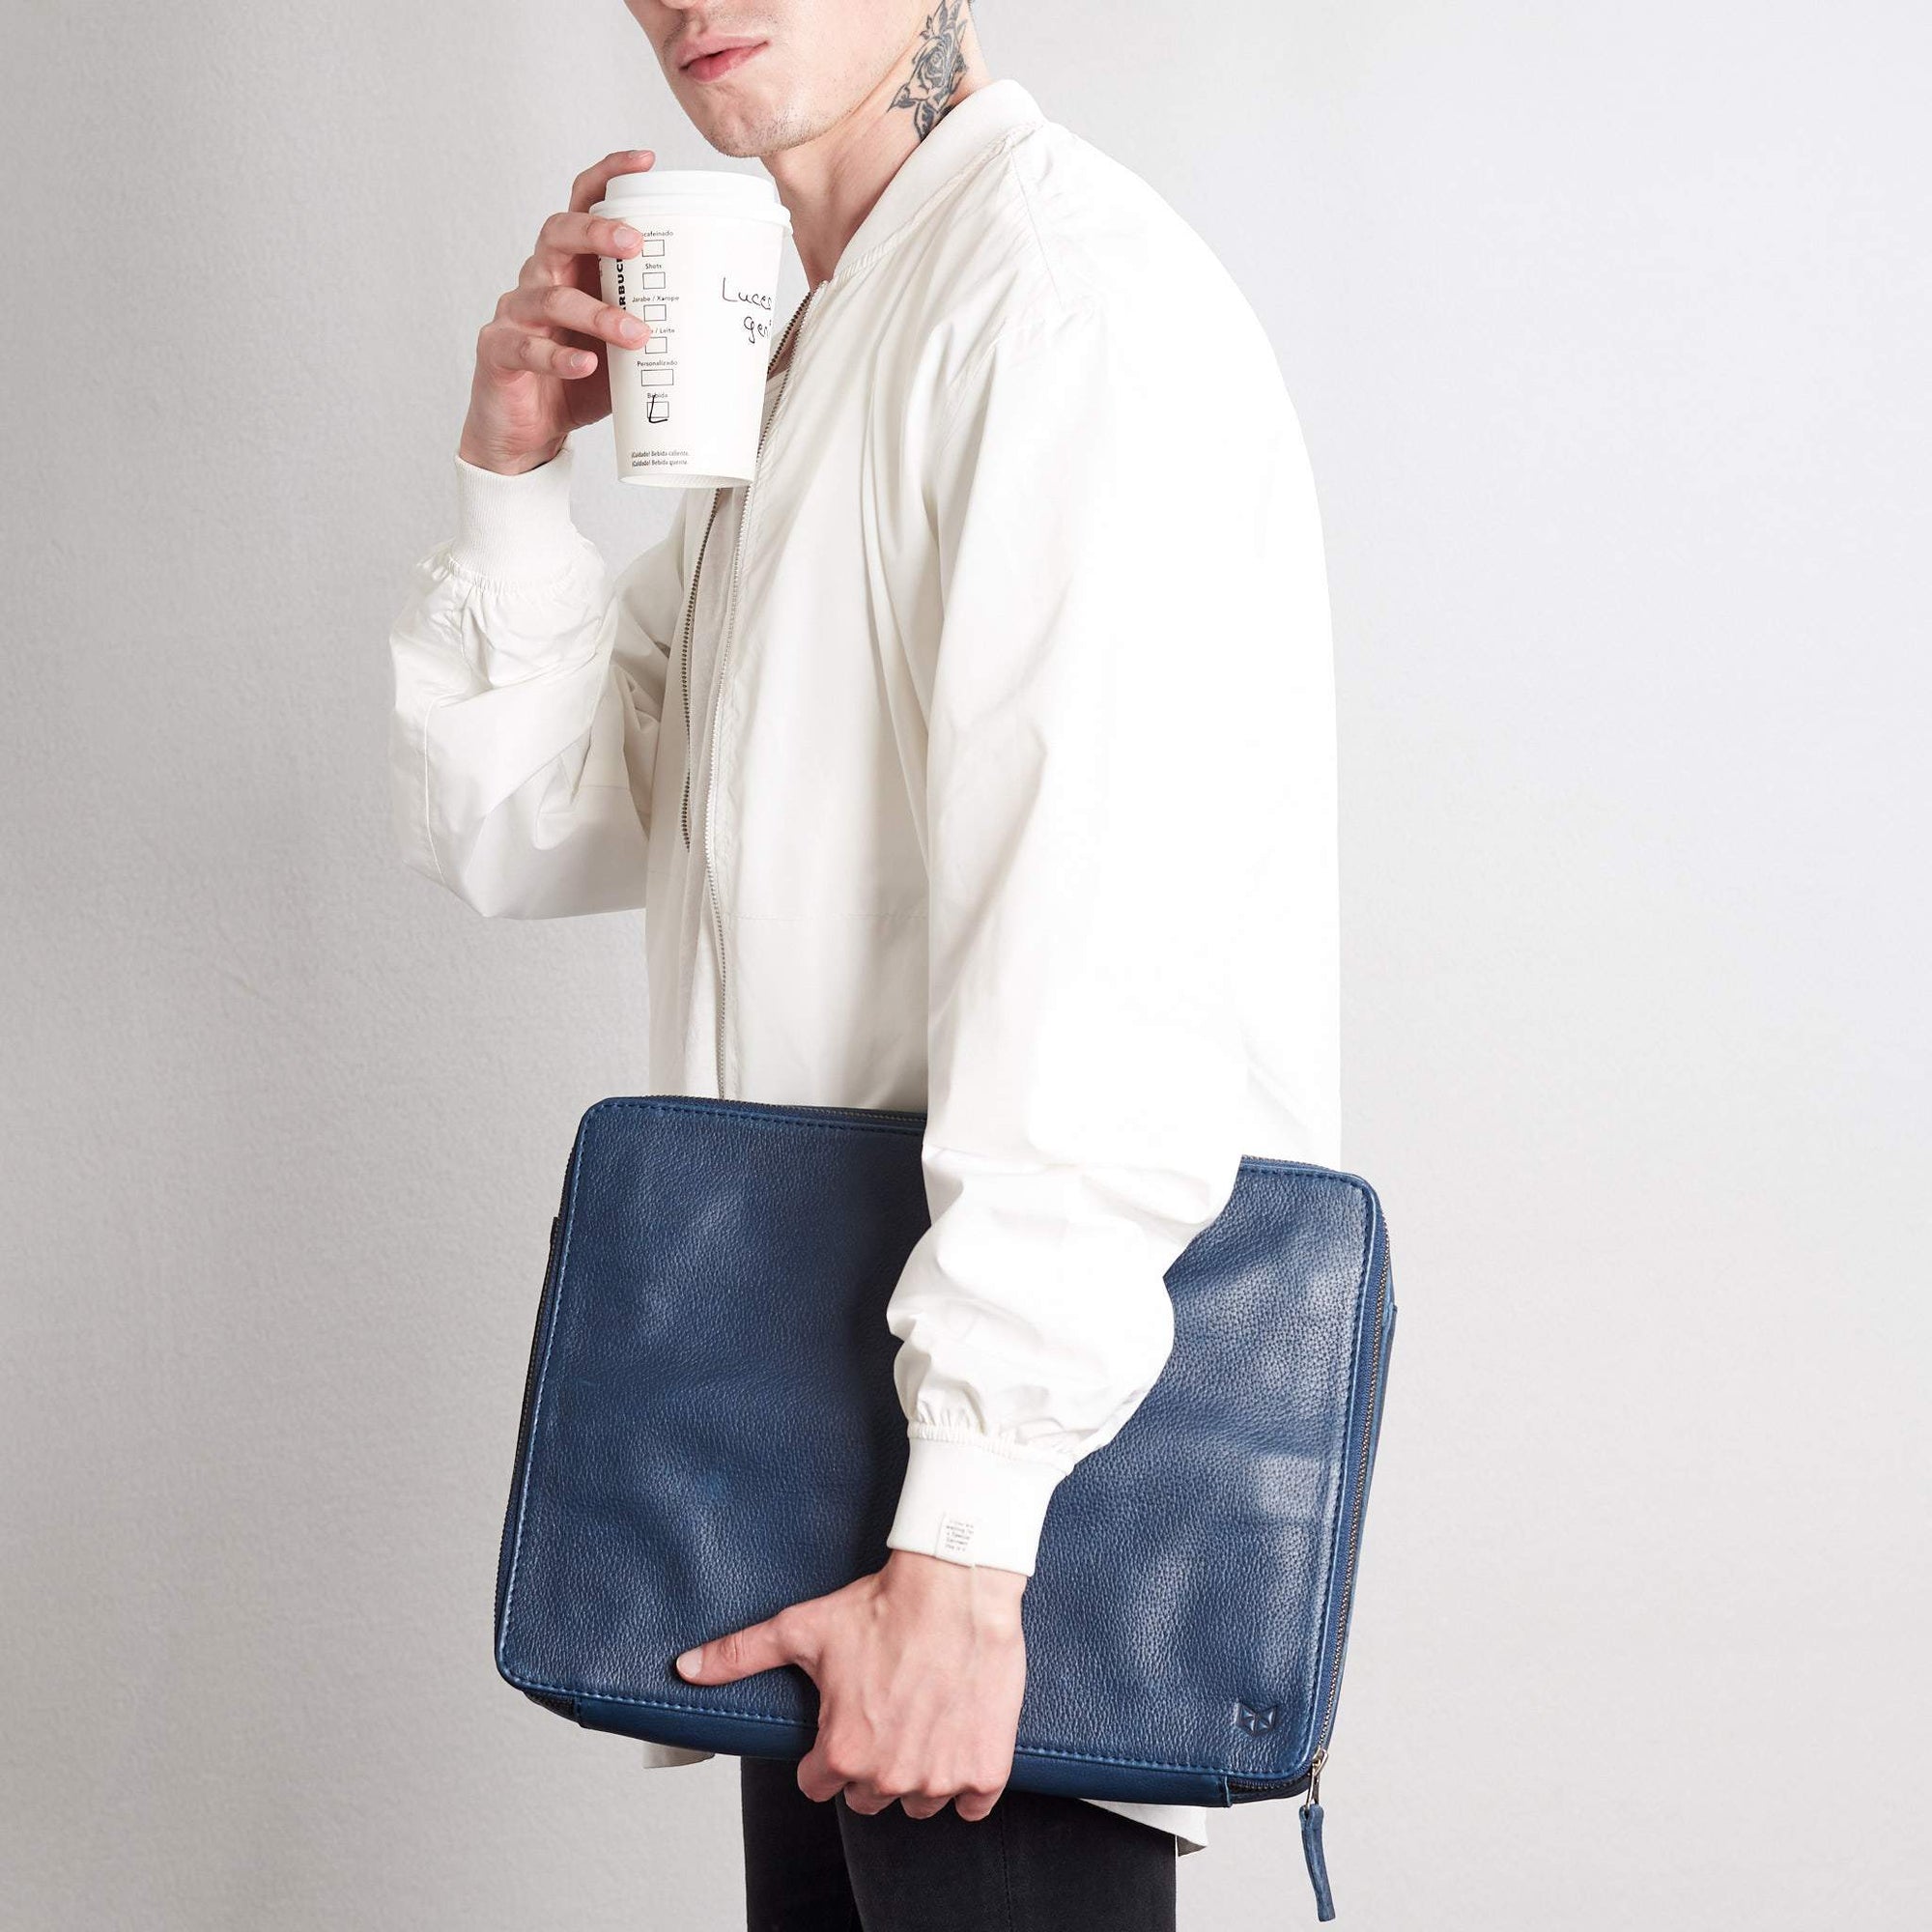 Everyday carry tech pouch. Navy blue large gadget bag by Capra Leather